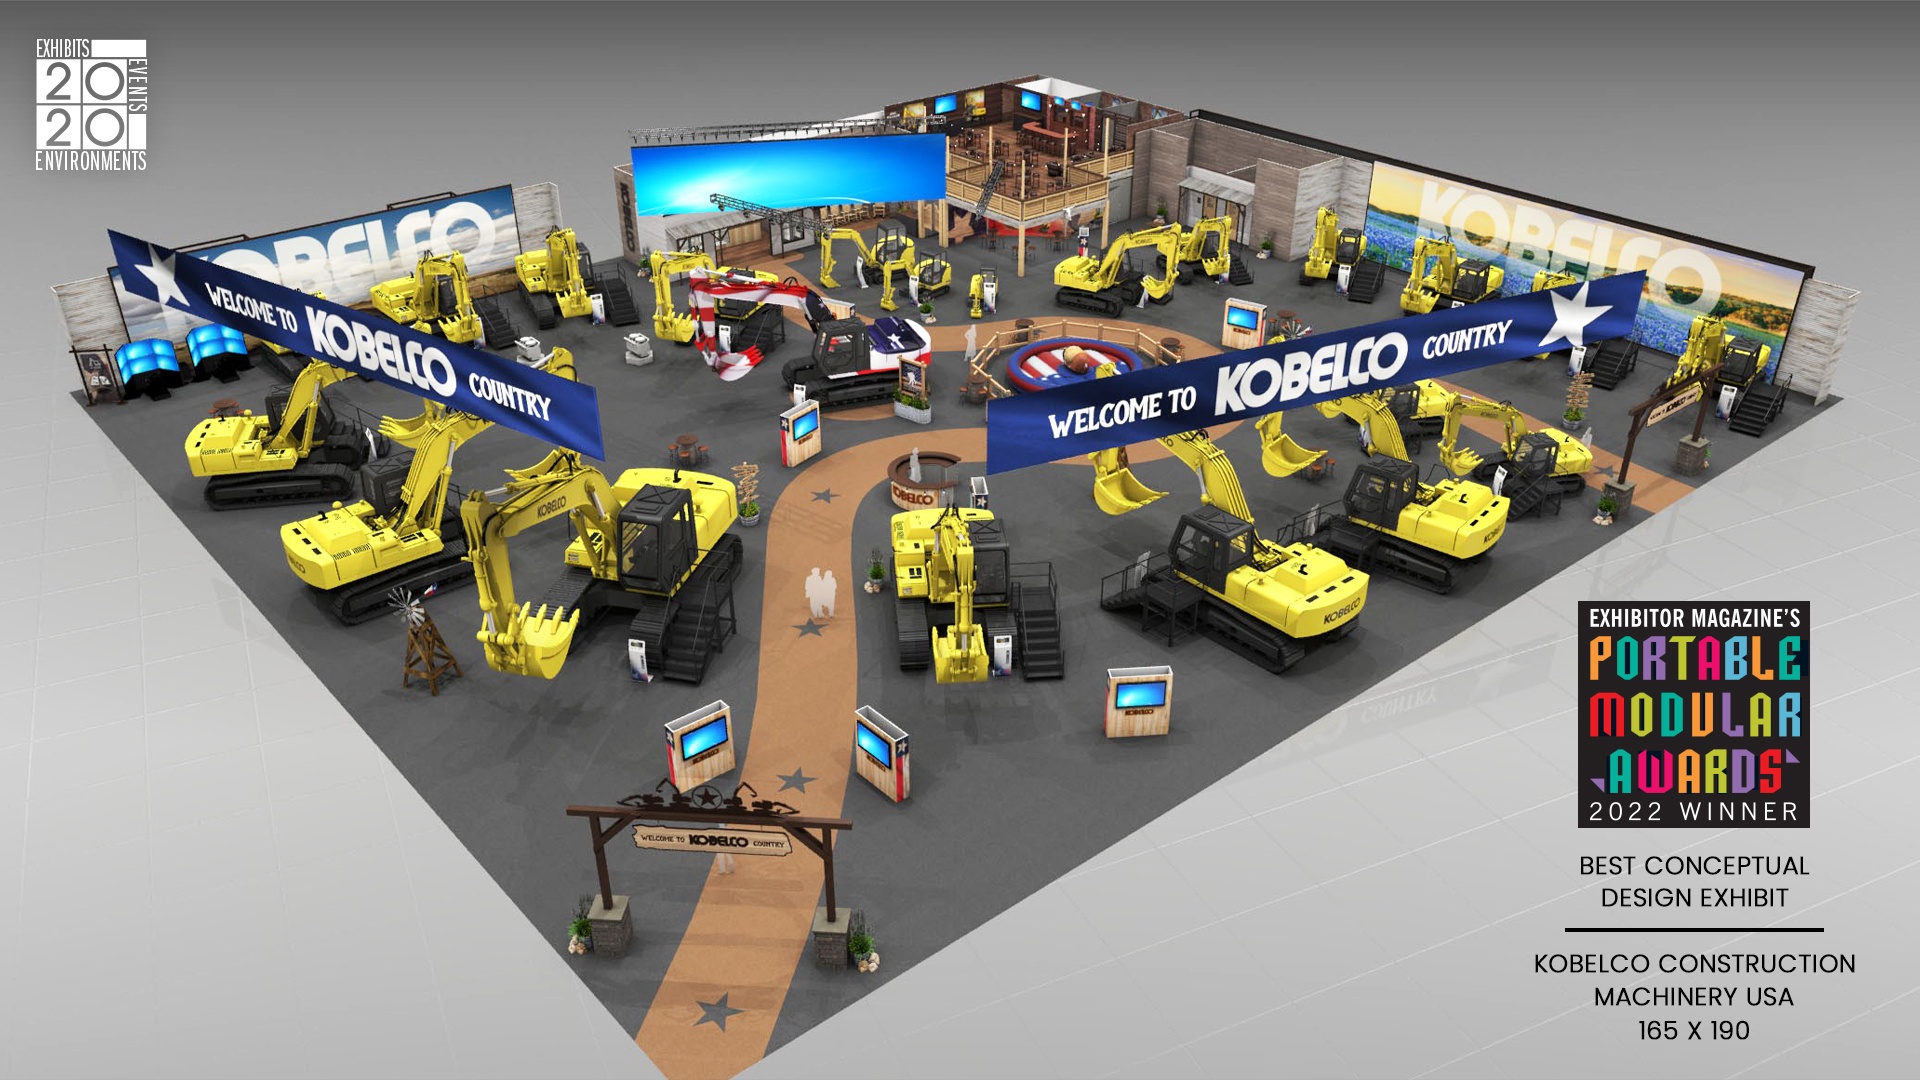 2020 Exhibits Wins PMA for Best Conceptual Design Exhibit for Kobelco Construction Machinery USA